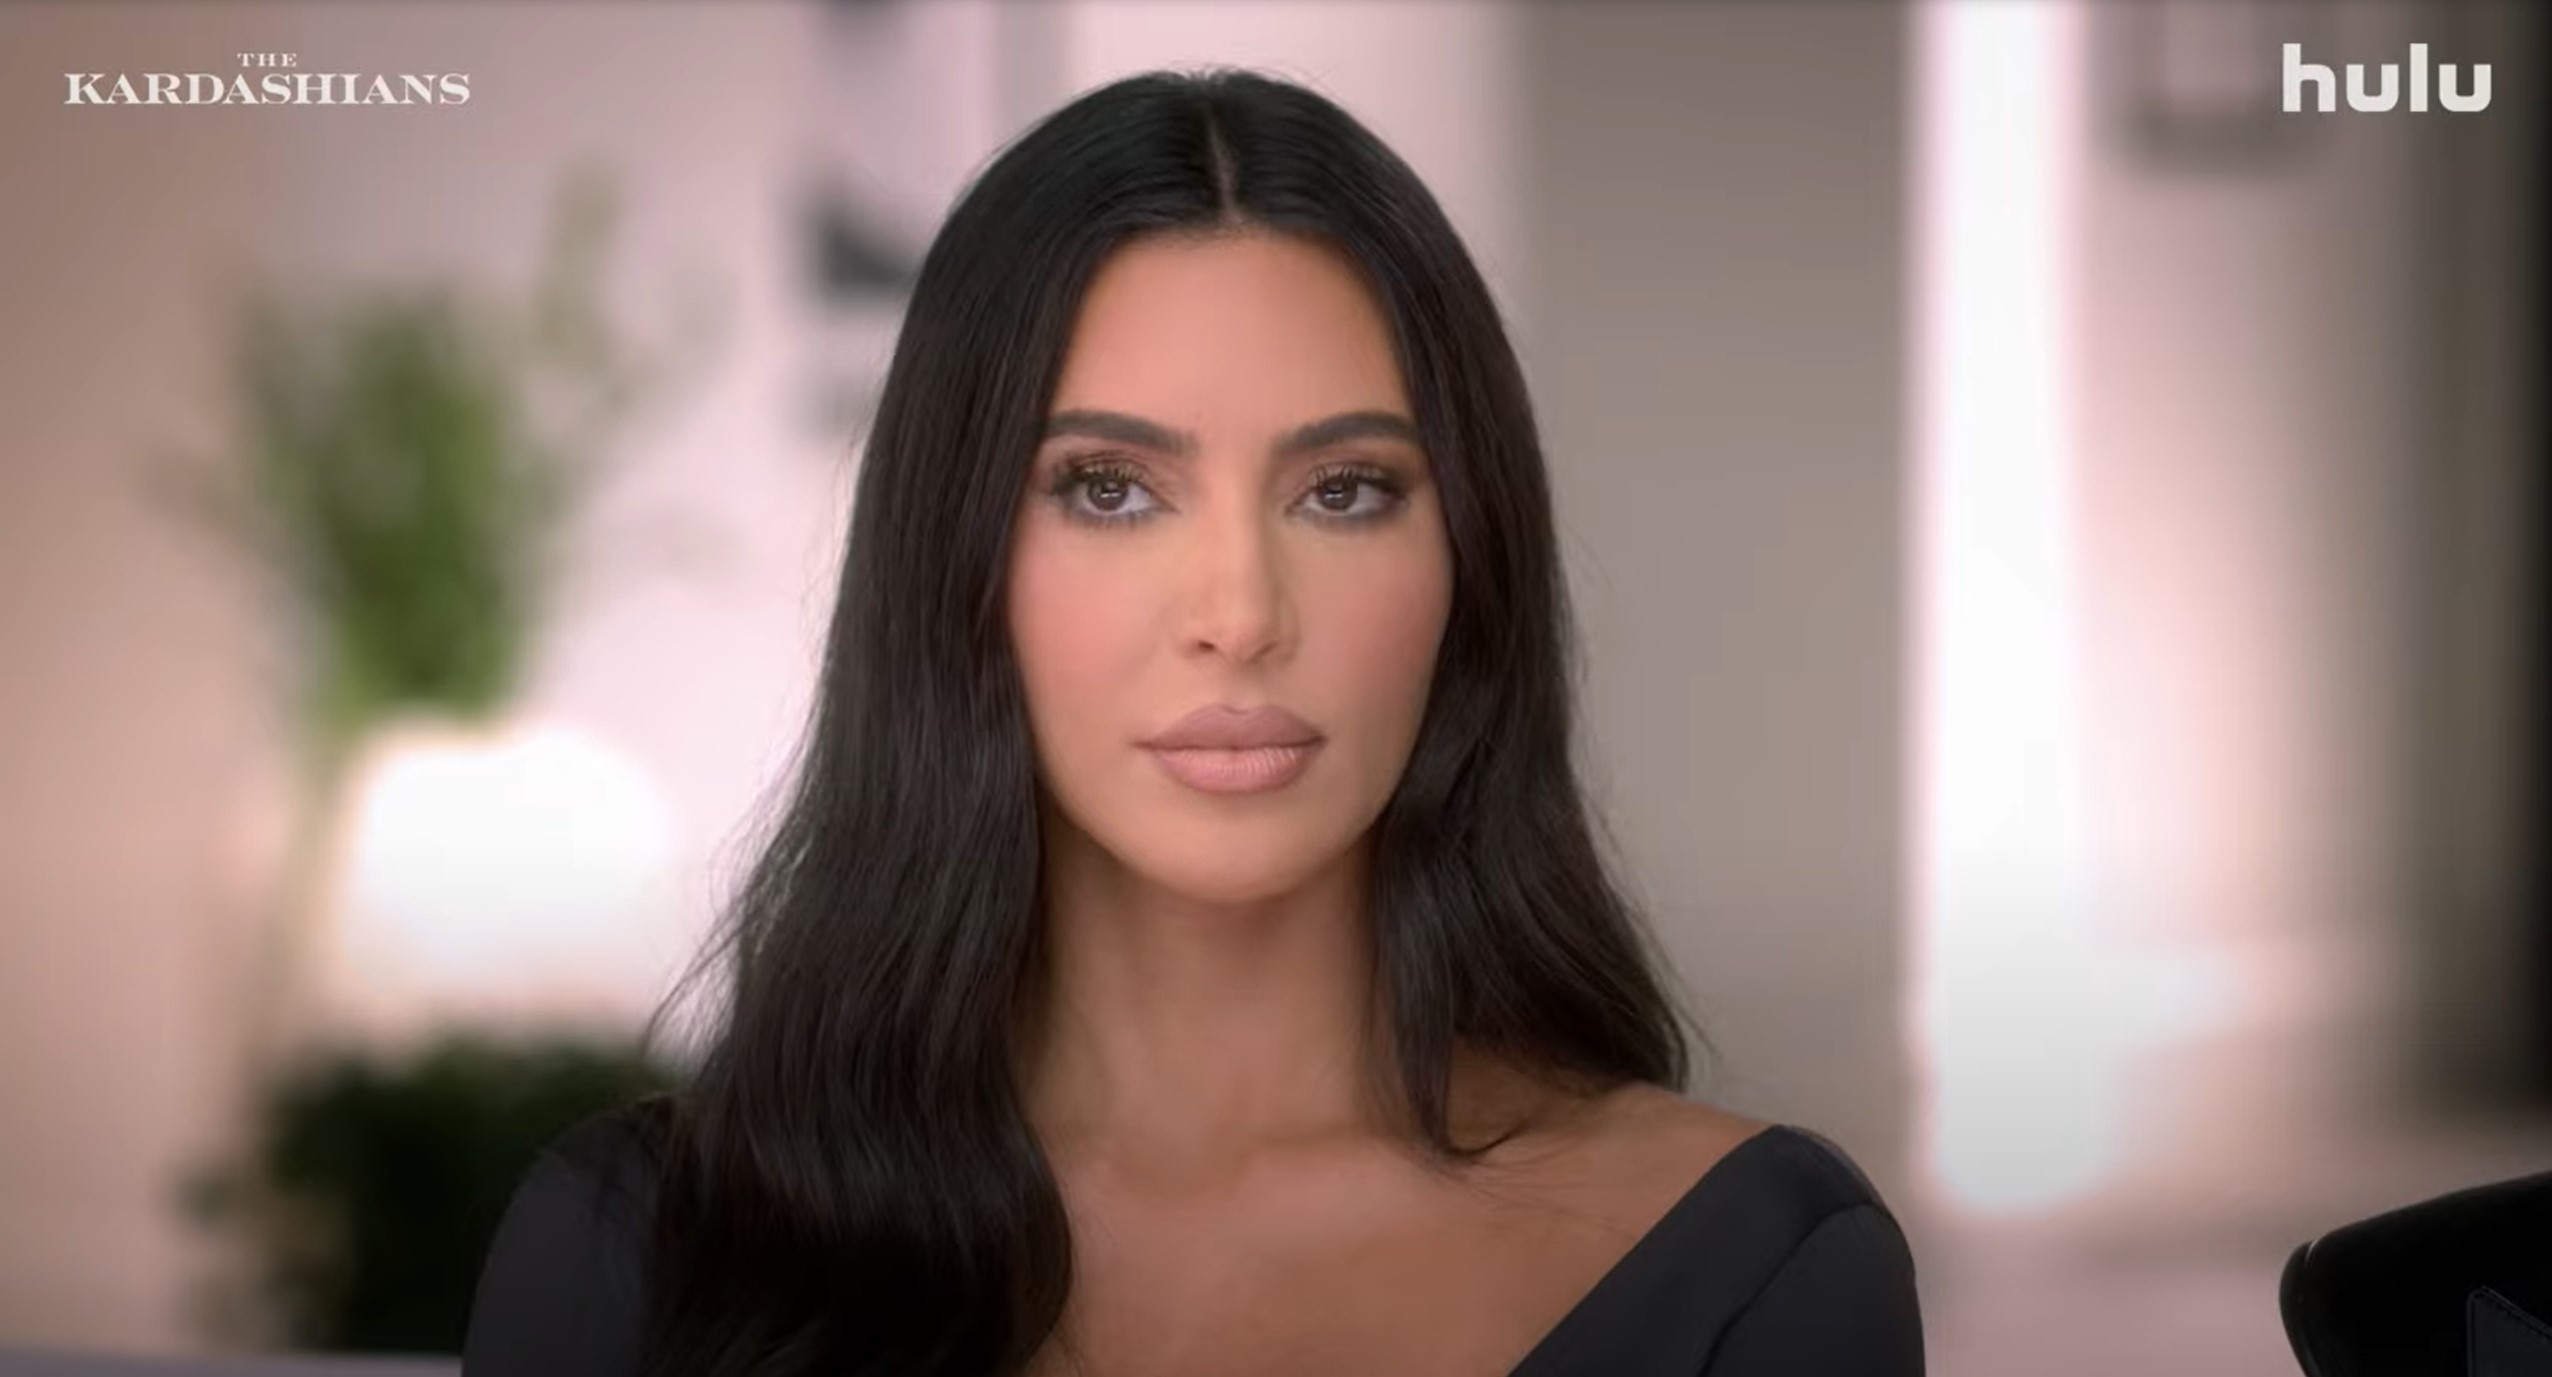 Fans became focused on Kim's lips in her new ad